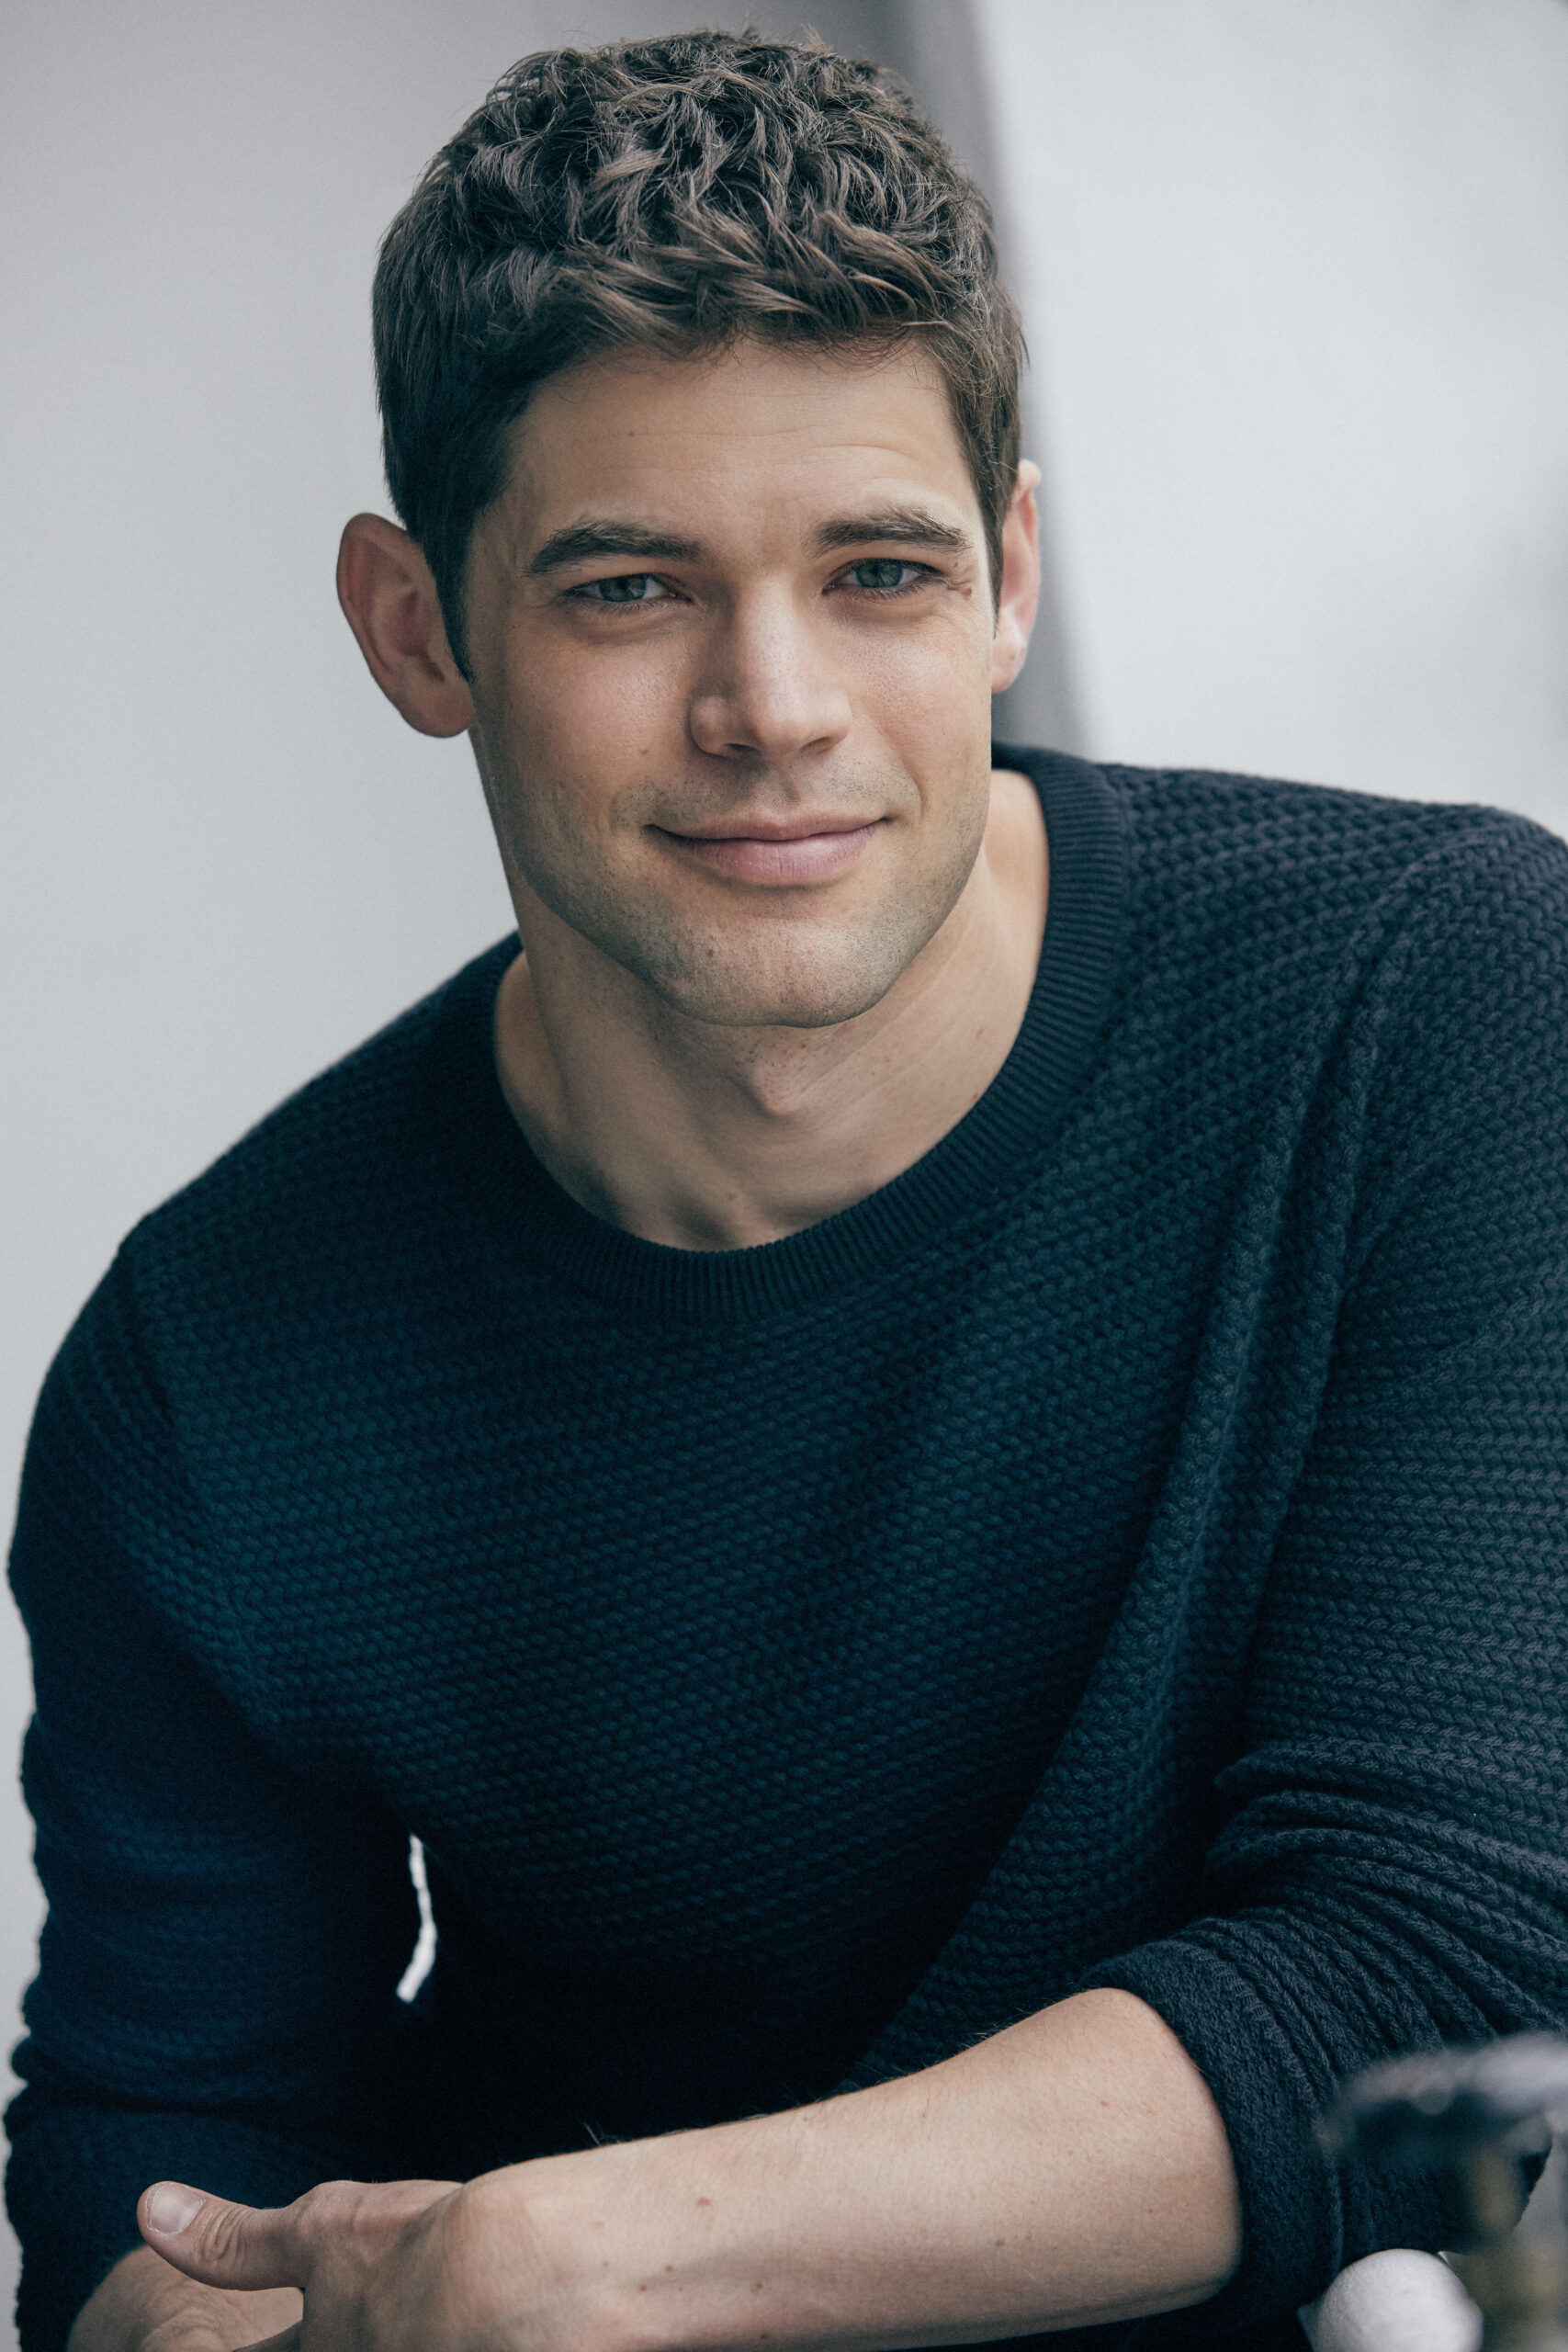 Broadway, television and film leading man Jeremy Jordan performs at WHBPAC on August 20. COURTESY WHBPAC